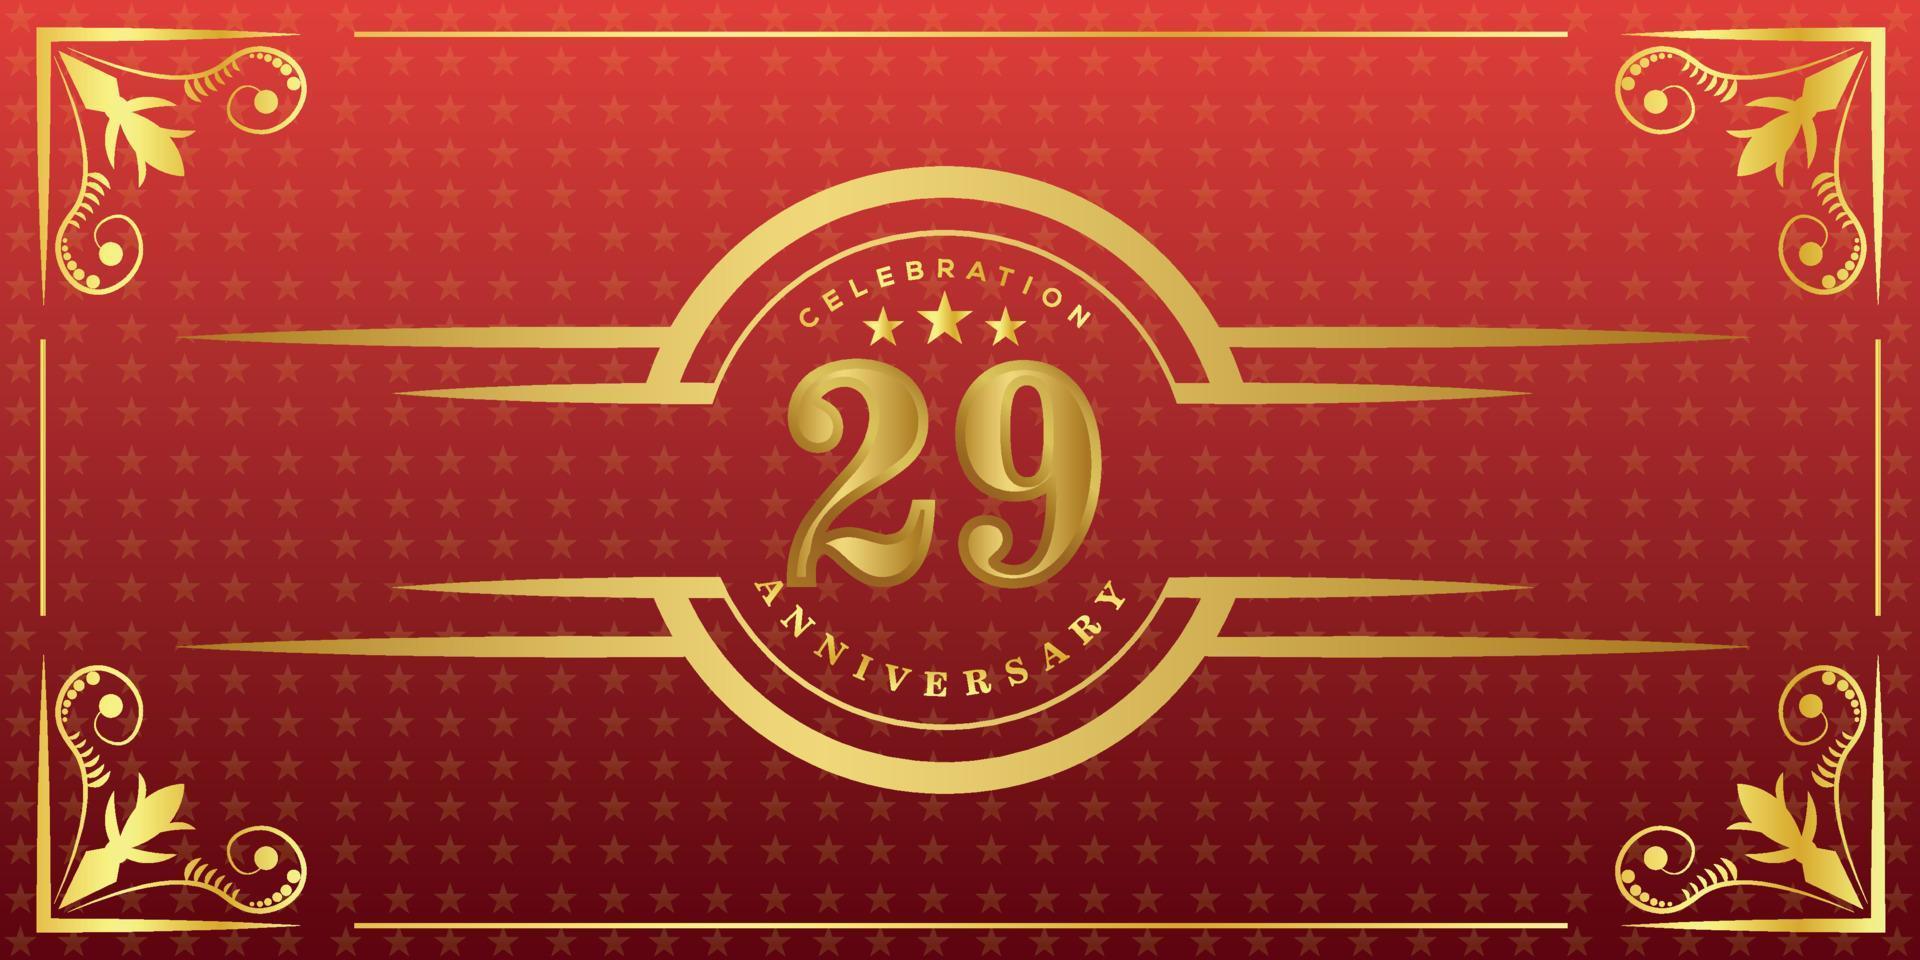 29th anniversary logo with golden ring, confetti and gold border isolated on elegant red background, sparkle, vector design for greeting card and invitation card